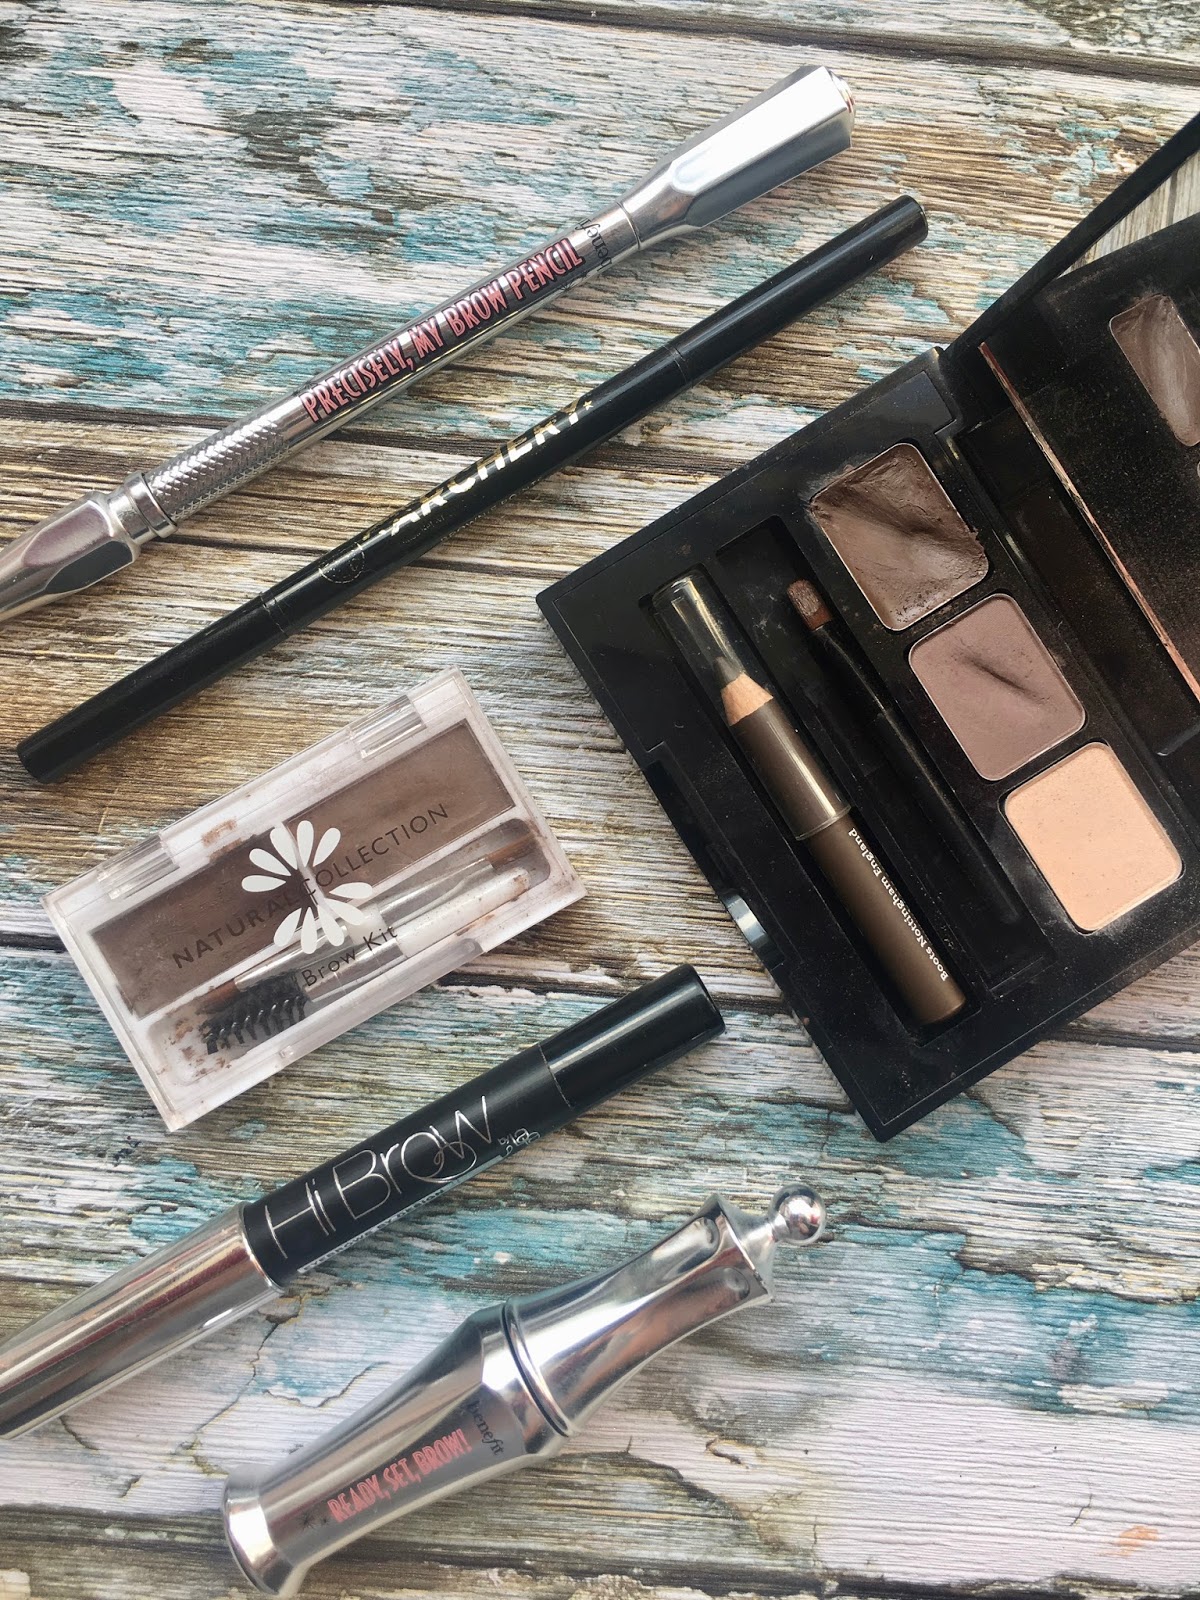 My Beauty Collection: Benefit Brow Products 